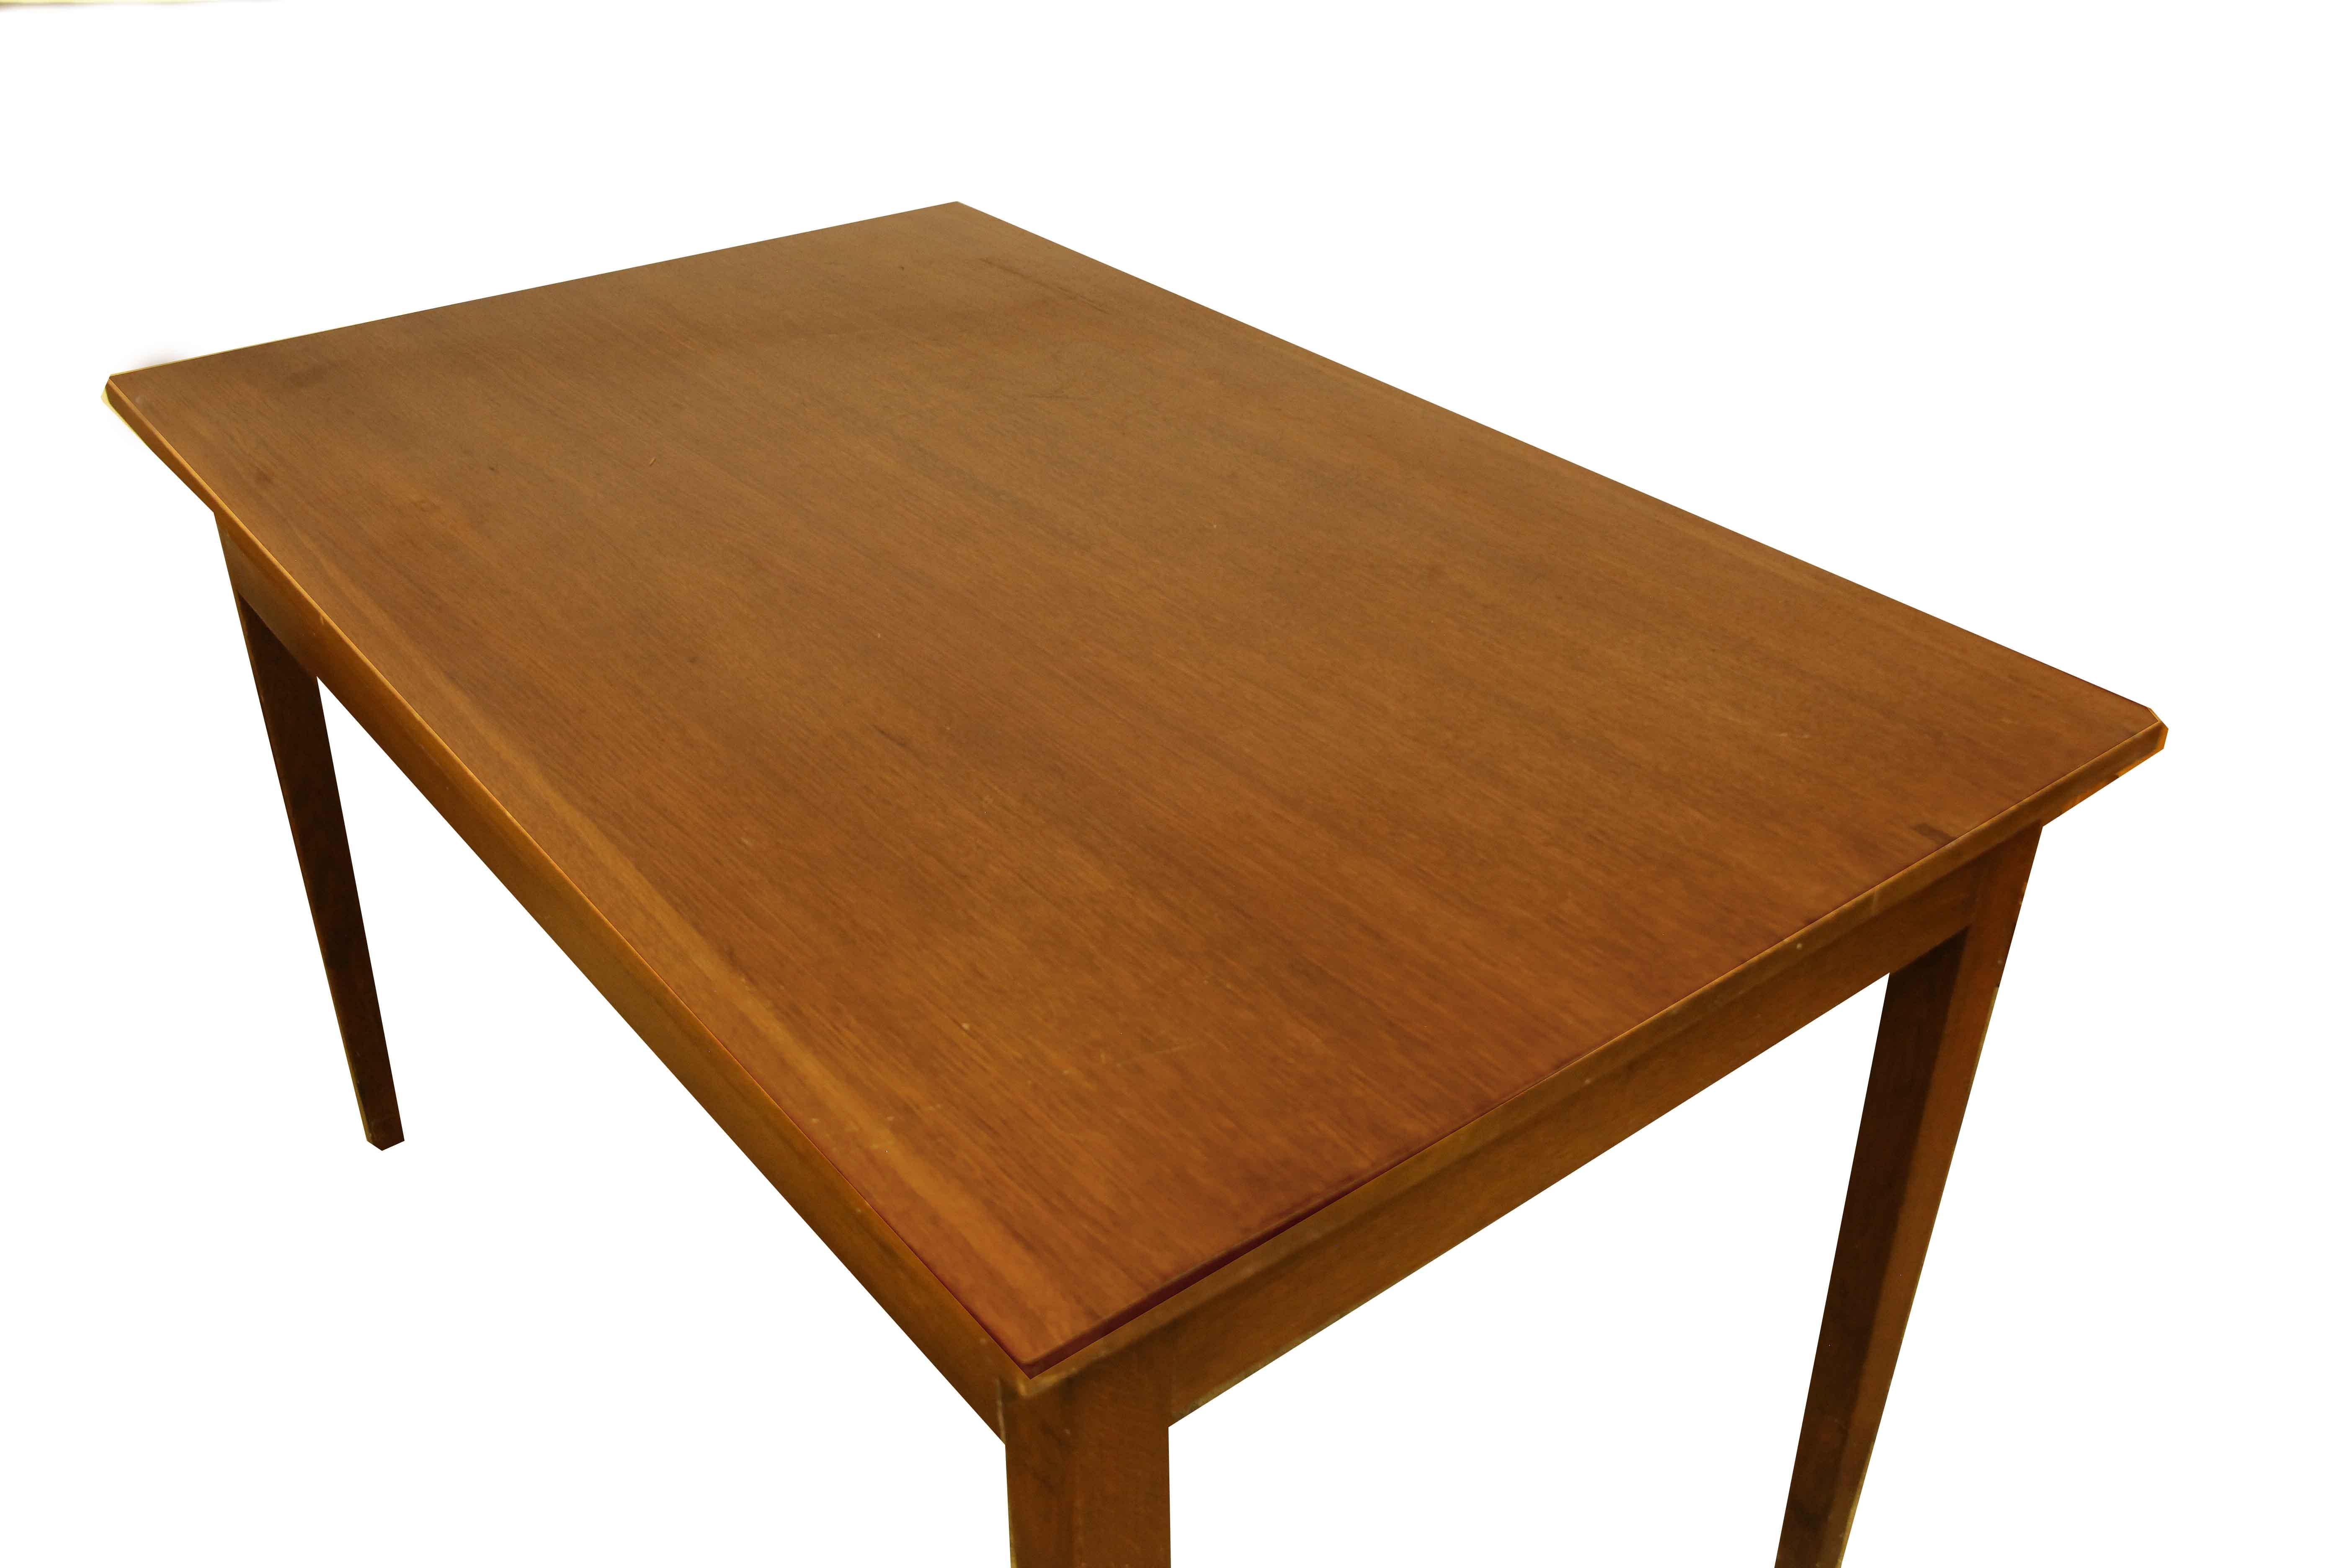 French oak one drawer farm table, this table has a drawer at one end, nicely tapered legs and ample room for sitting
(25.63'' clearance from the floor to the apron), warm oak color and patina.